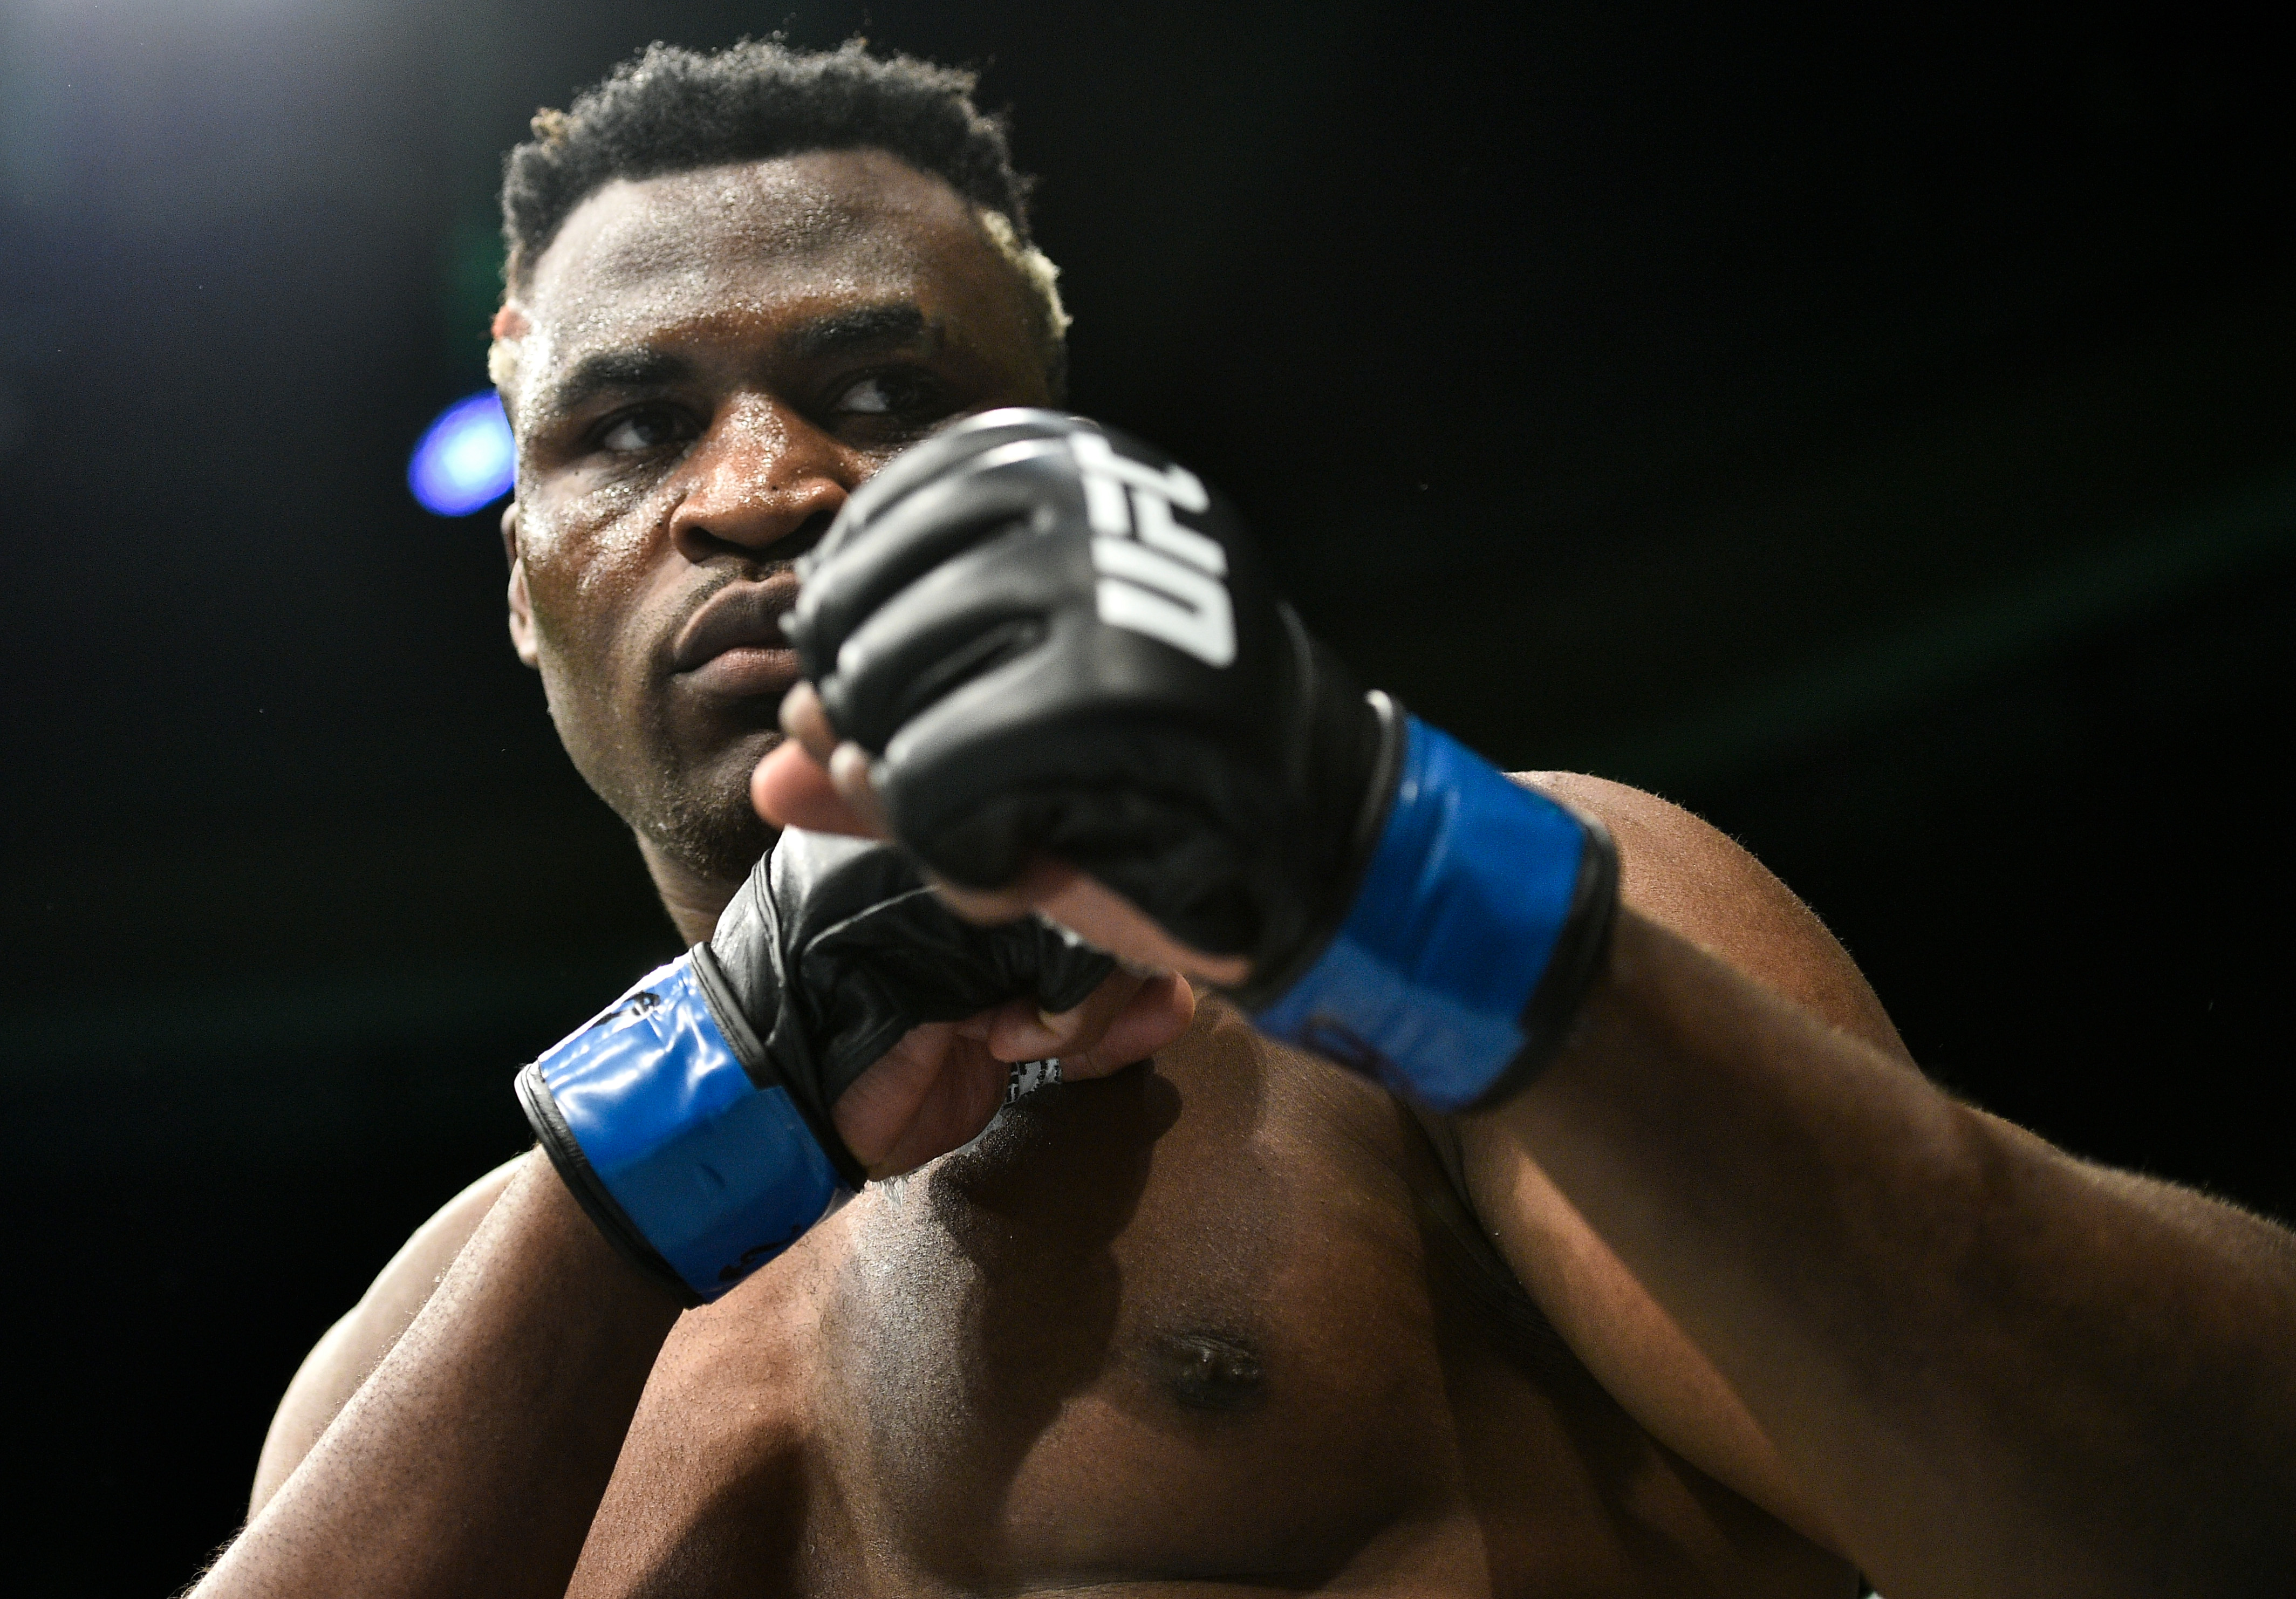 Francis N’gannou is listed as a betting underdog to Ciryl Gane in the UFC 270 main event